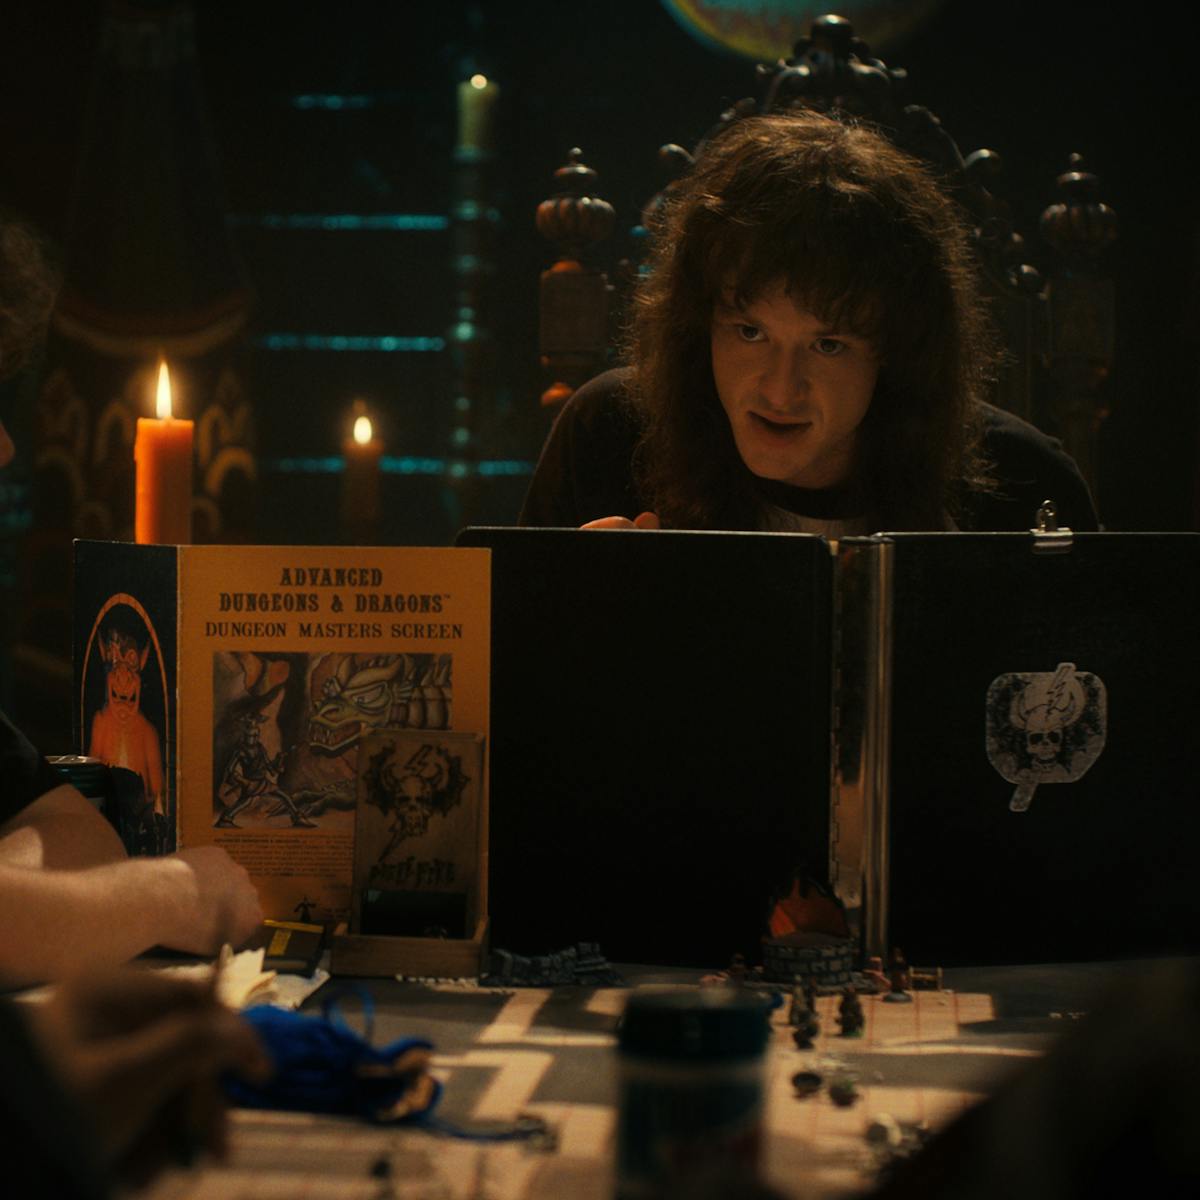 Eddie Munson (Joseph Quinn) plays Dungeons and Dragons by candlelight.